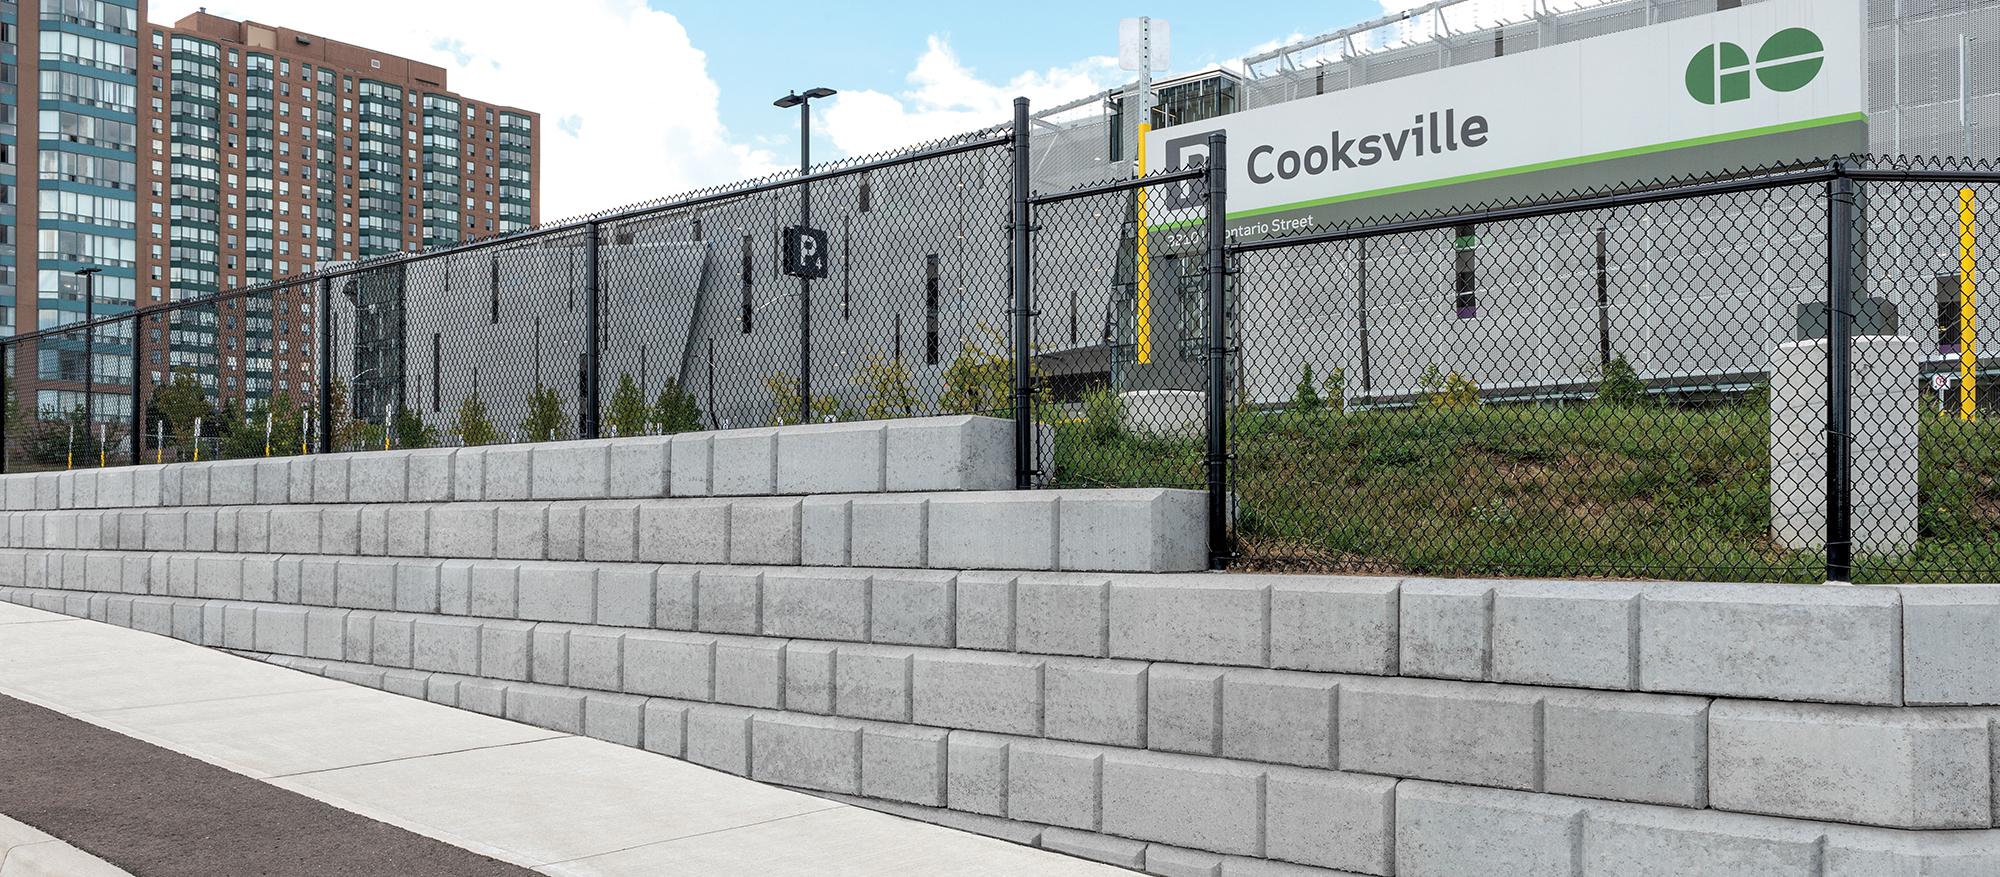 A retaining wall built with grey Dura-Hold blocks borders the perimeter of Cooksville Go station, complete with a black chain-link fence.